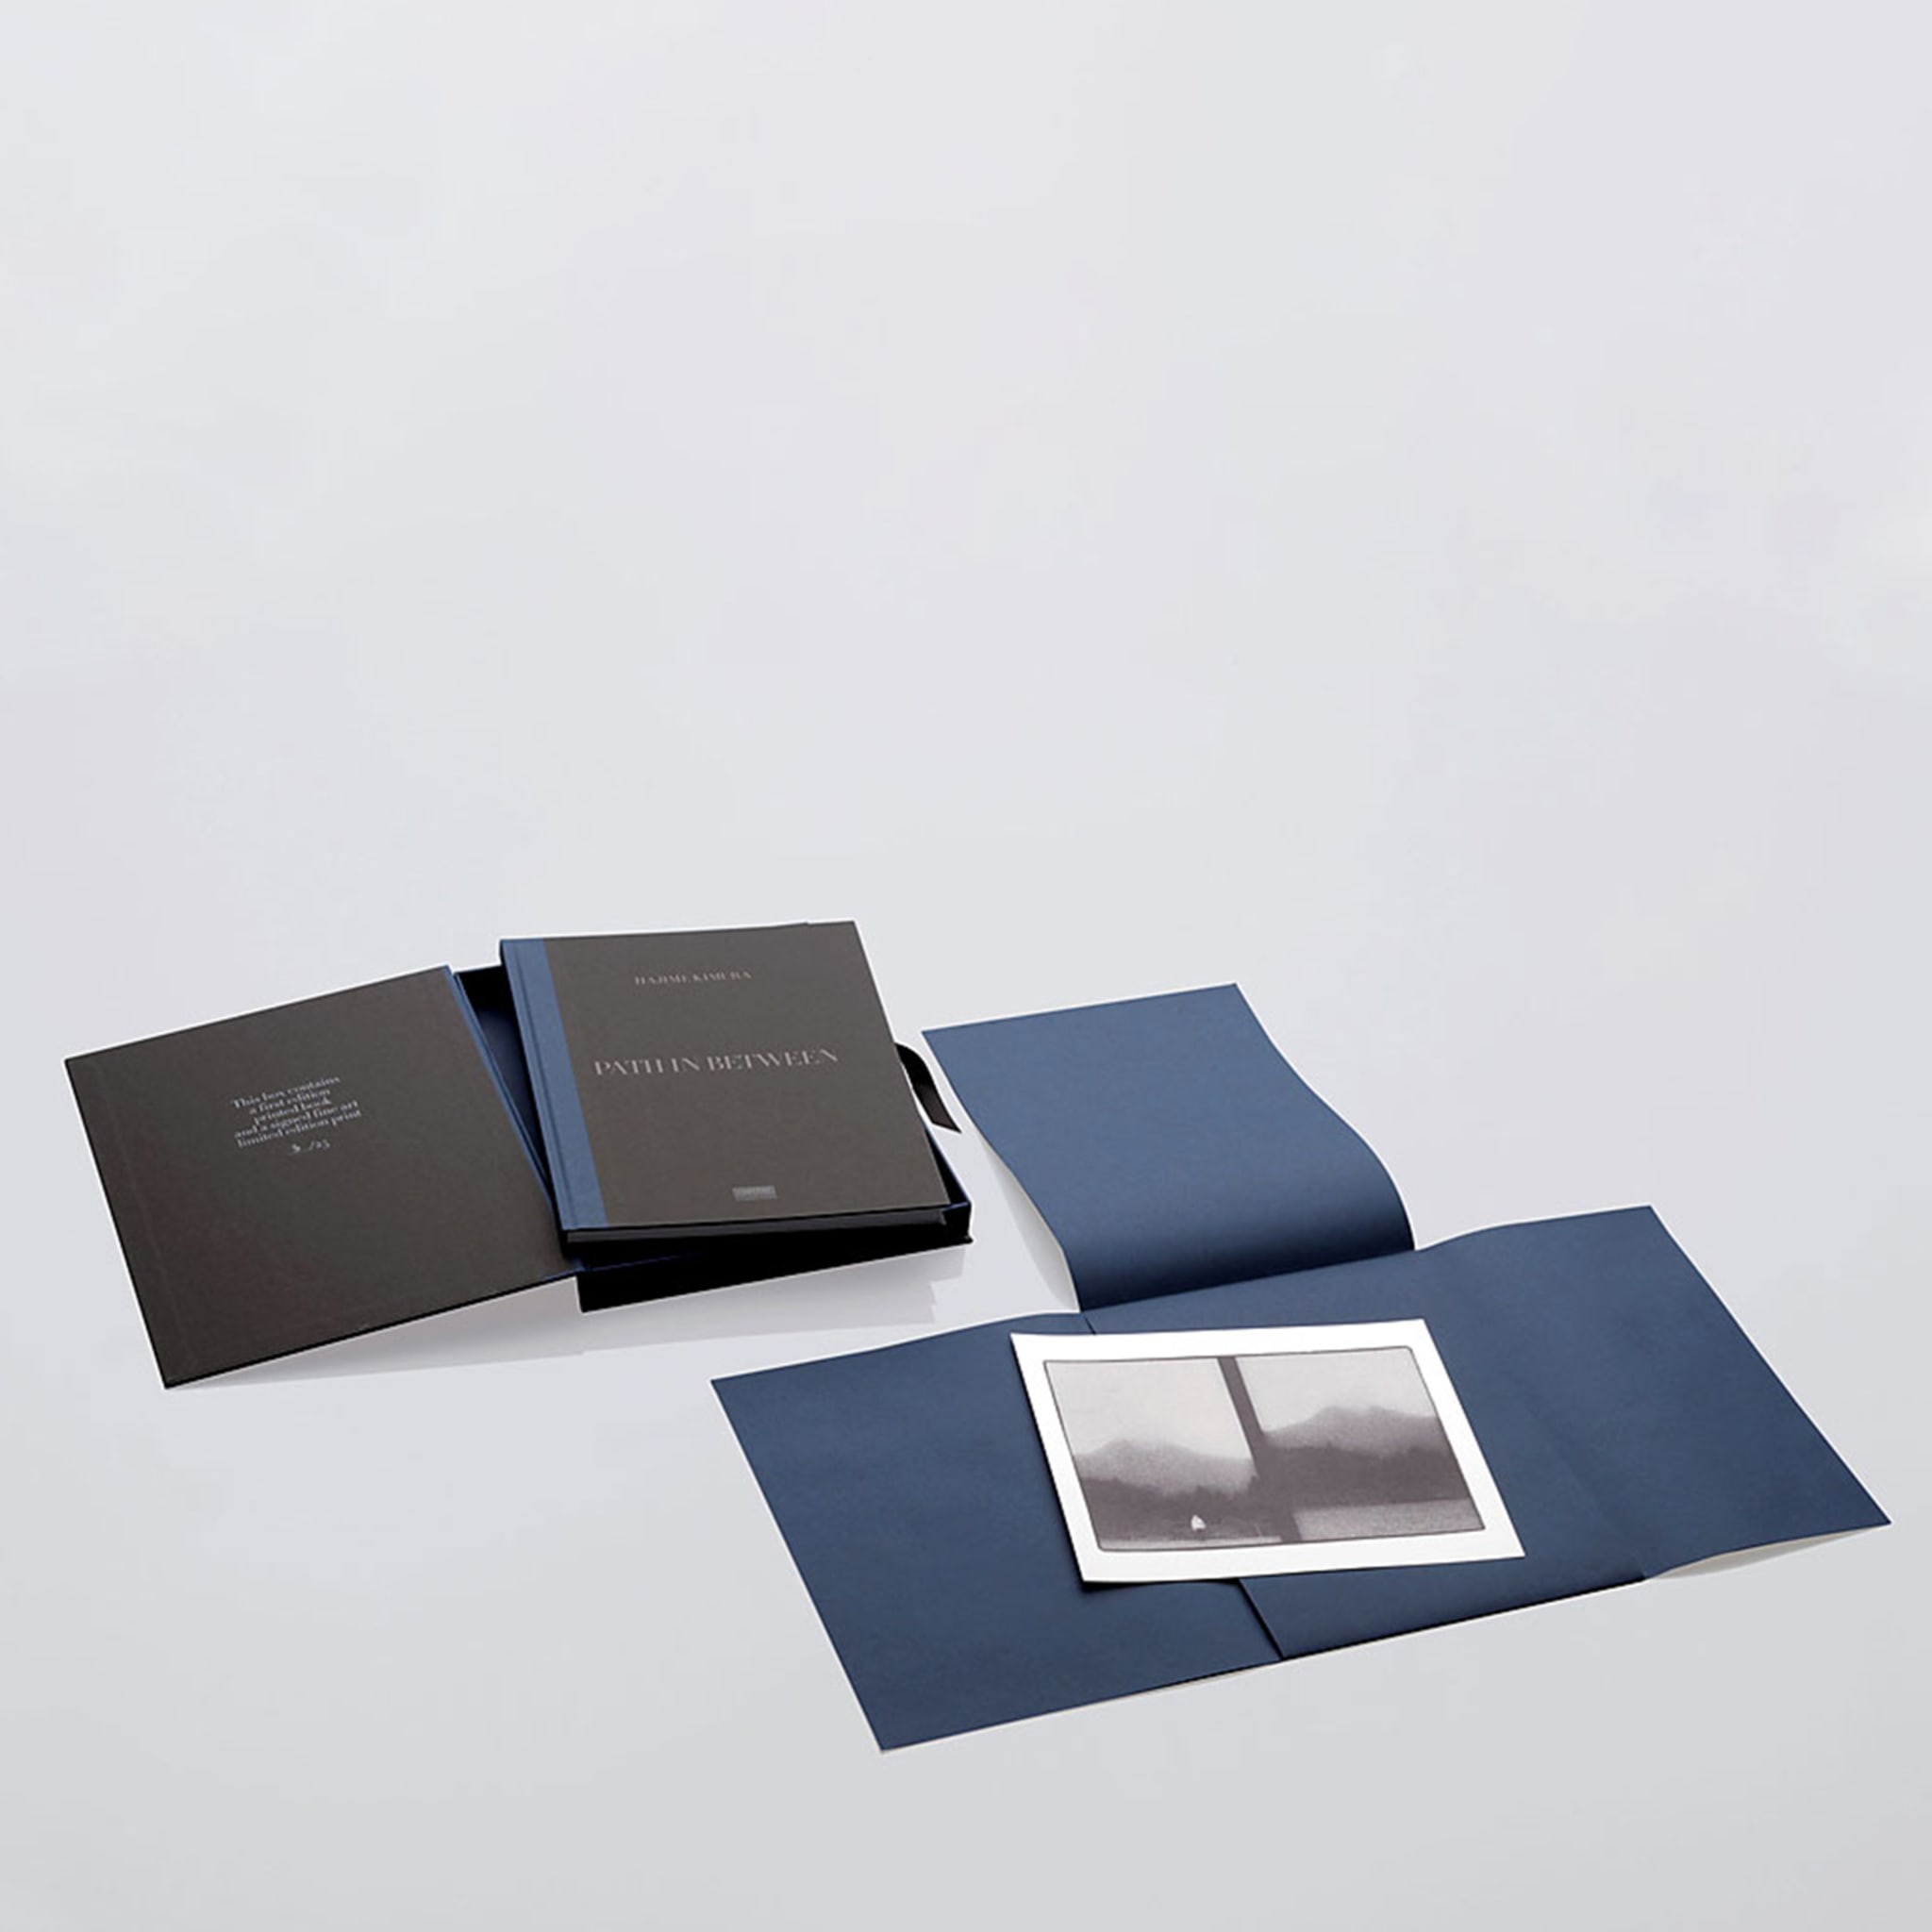 Path In Between - Special Edition Box Set - Hajime Kimura - Limited Edition of 25 copies - Alternative view 2